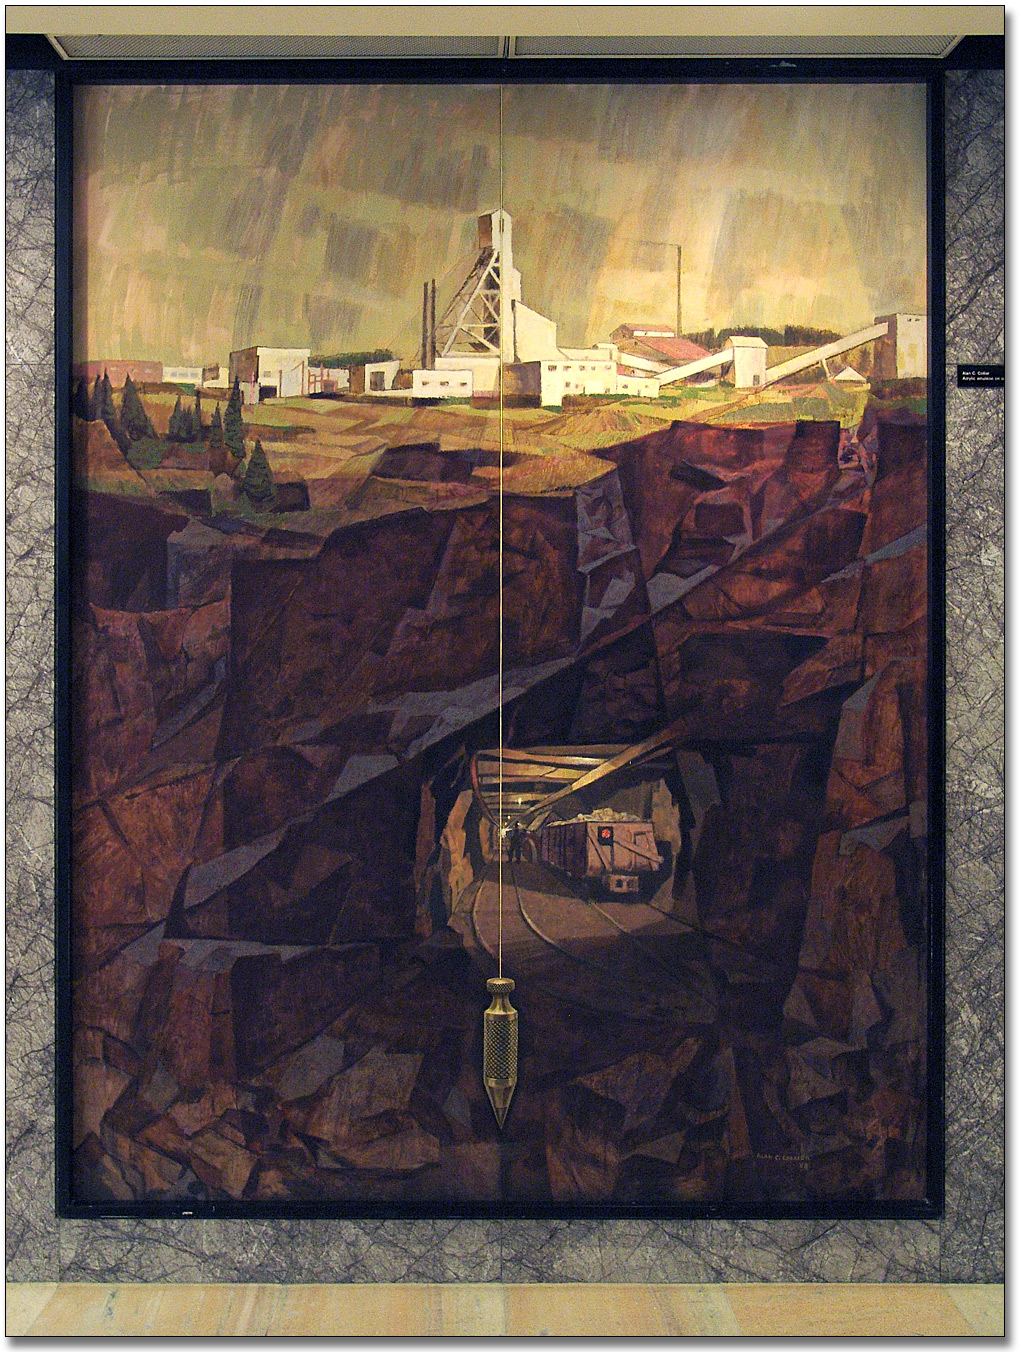 Mining in Ontario, 1968 - Alan Caswell Collier